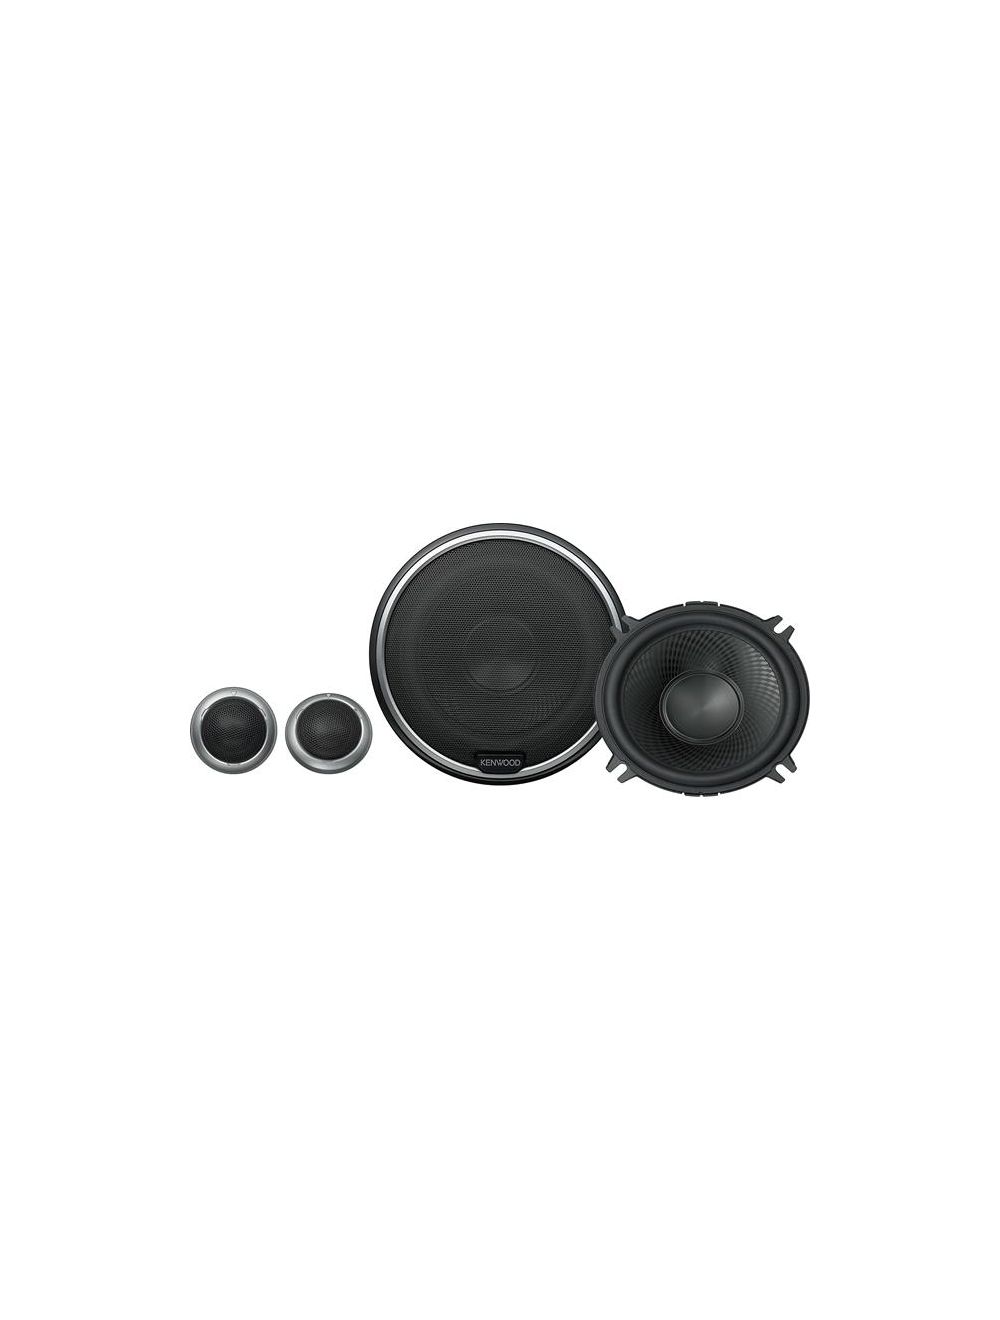 Kenwood KFC-P510PS Performance Series 5" mid-woofer with 1" Swivel Tweeter - Component Speaker System